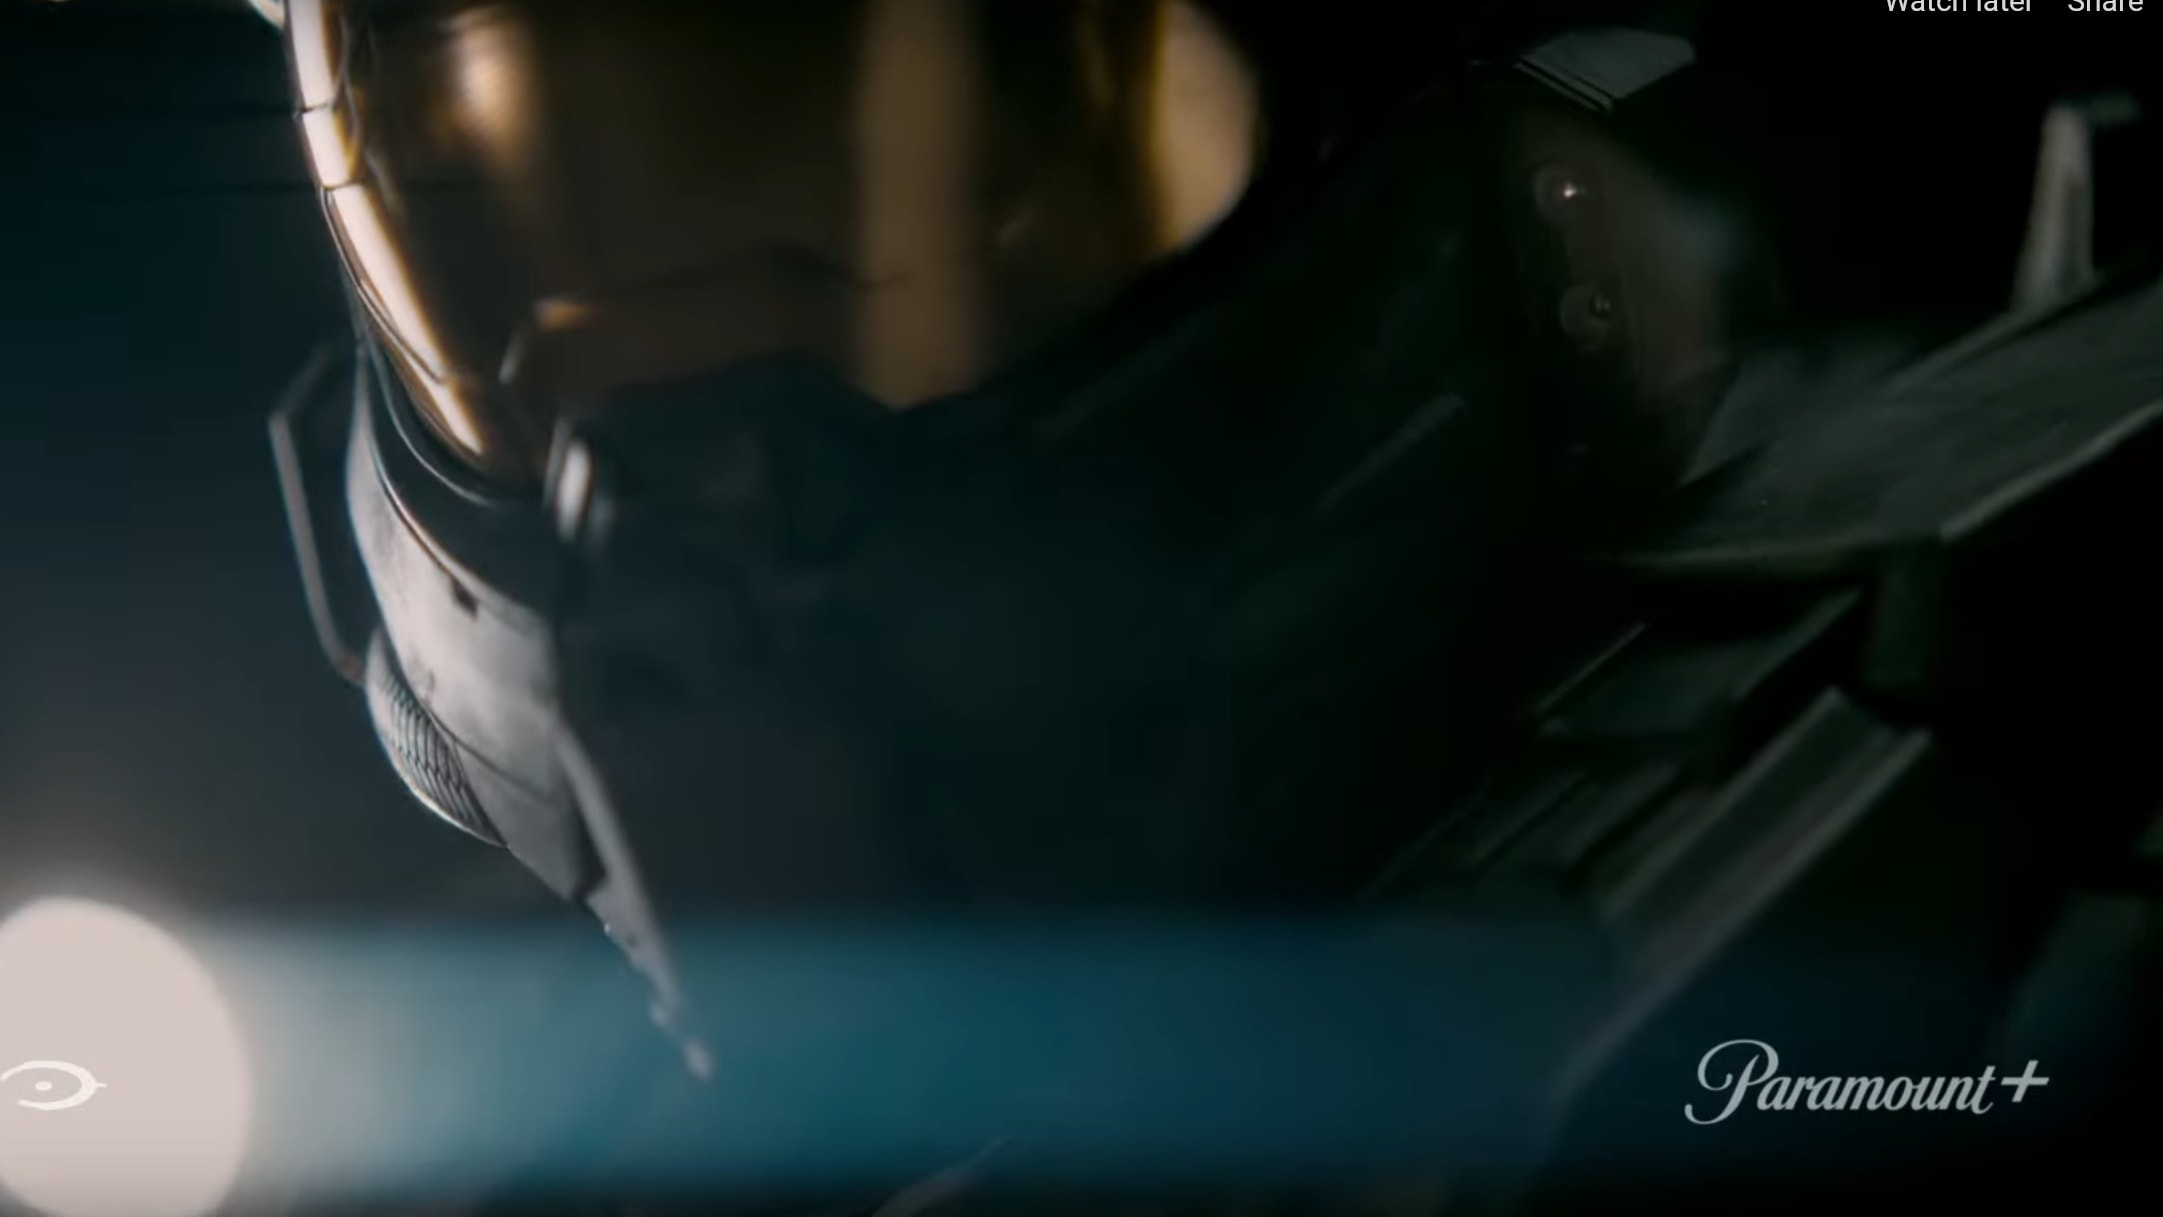 Halo TV Series Promotes Diverse Cast Over Master Chief In First Teaser  Trailer - Bounding Into Comics